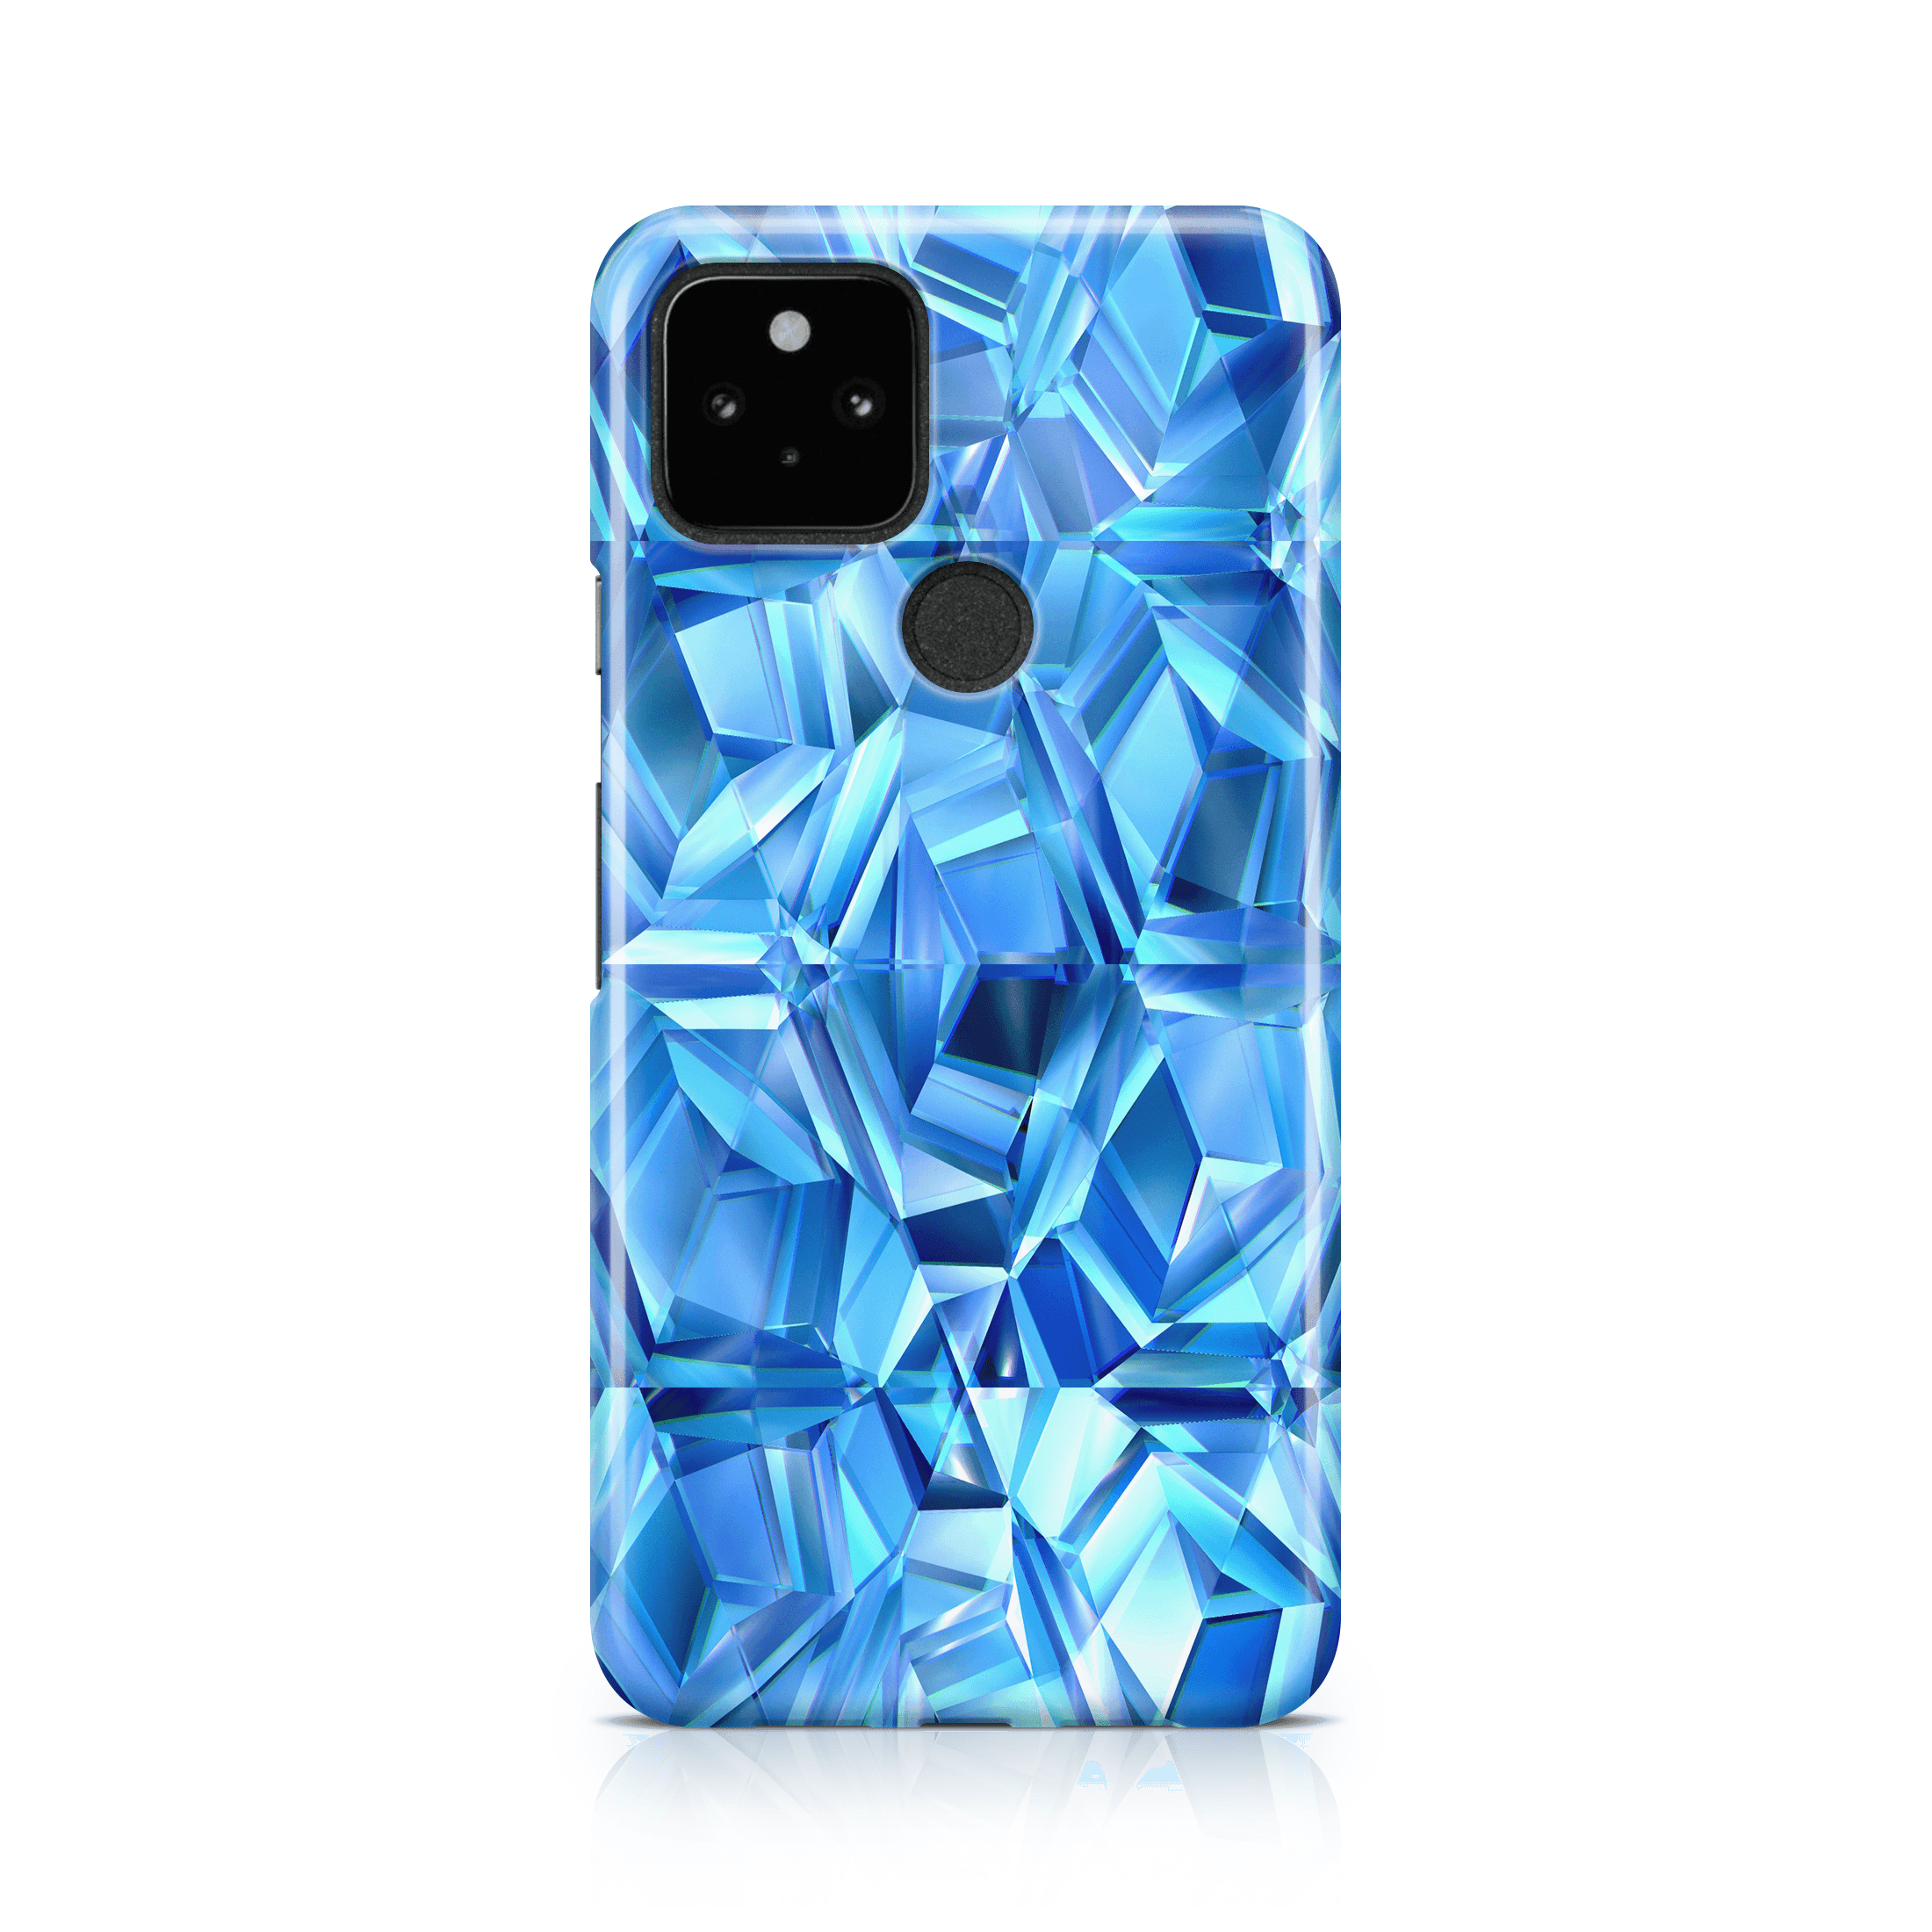 Blue Zircon - Google phone case designs by CaseSwagger